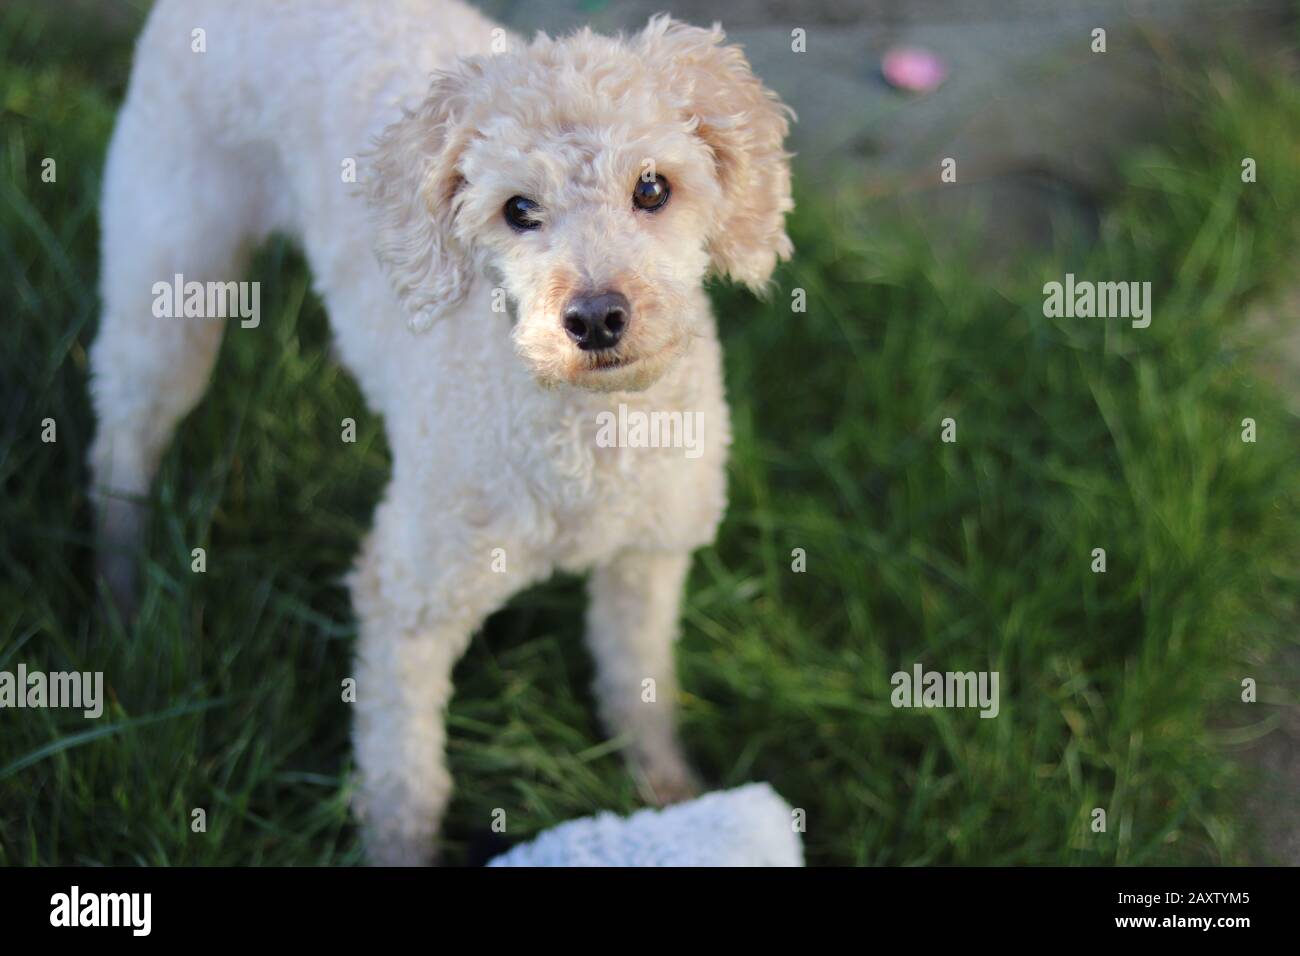 toy apricot poodle, 4 years old, standing outdoors with brown eyes and brown snout, apricot poodle standing in grass, cute poodle looking into camera Stock Photo